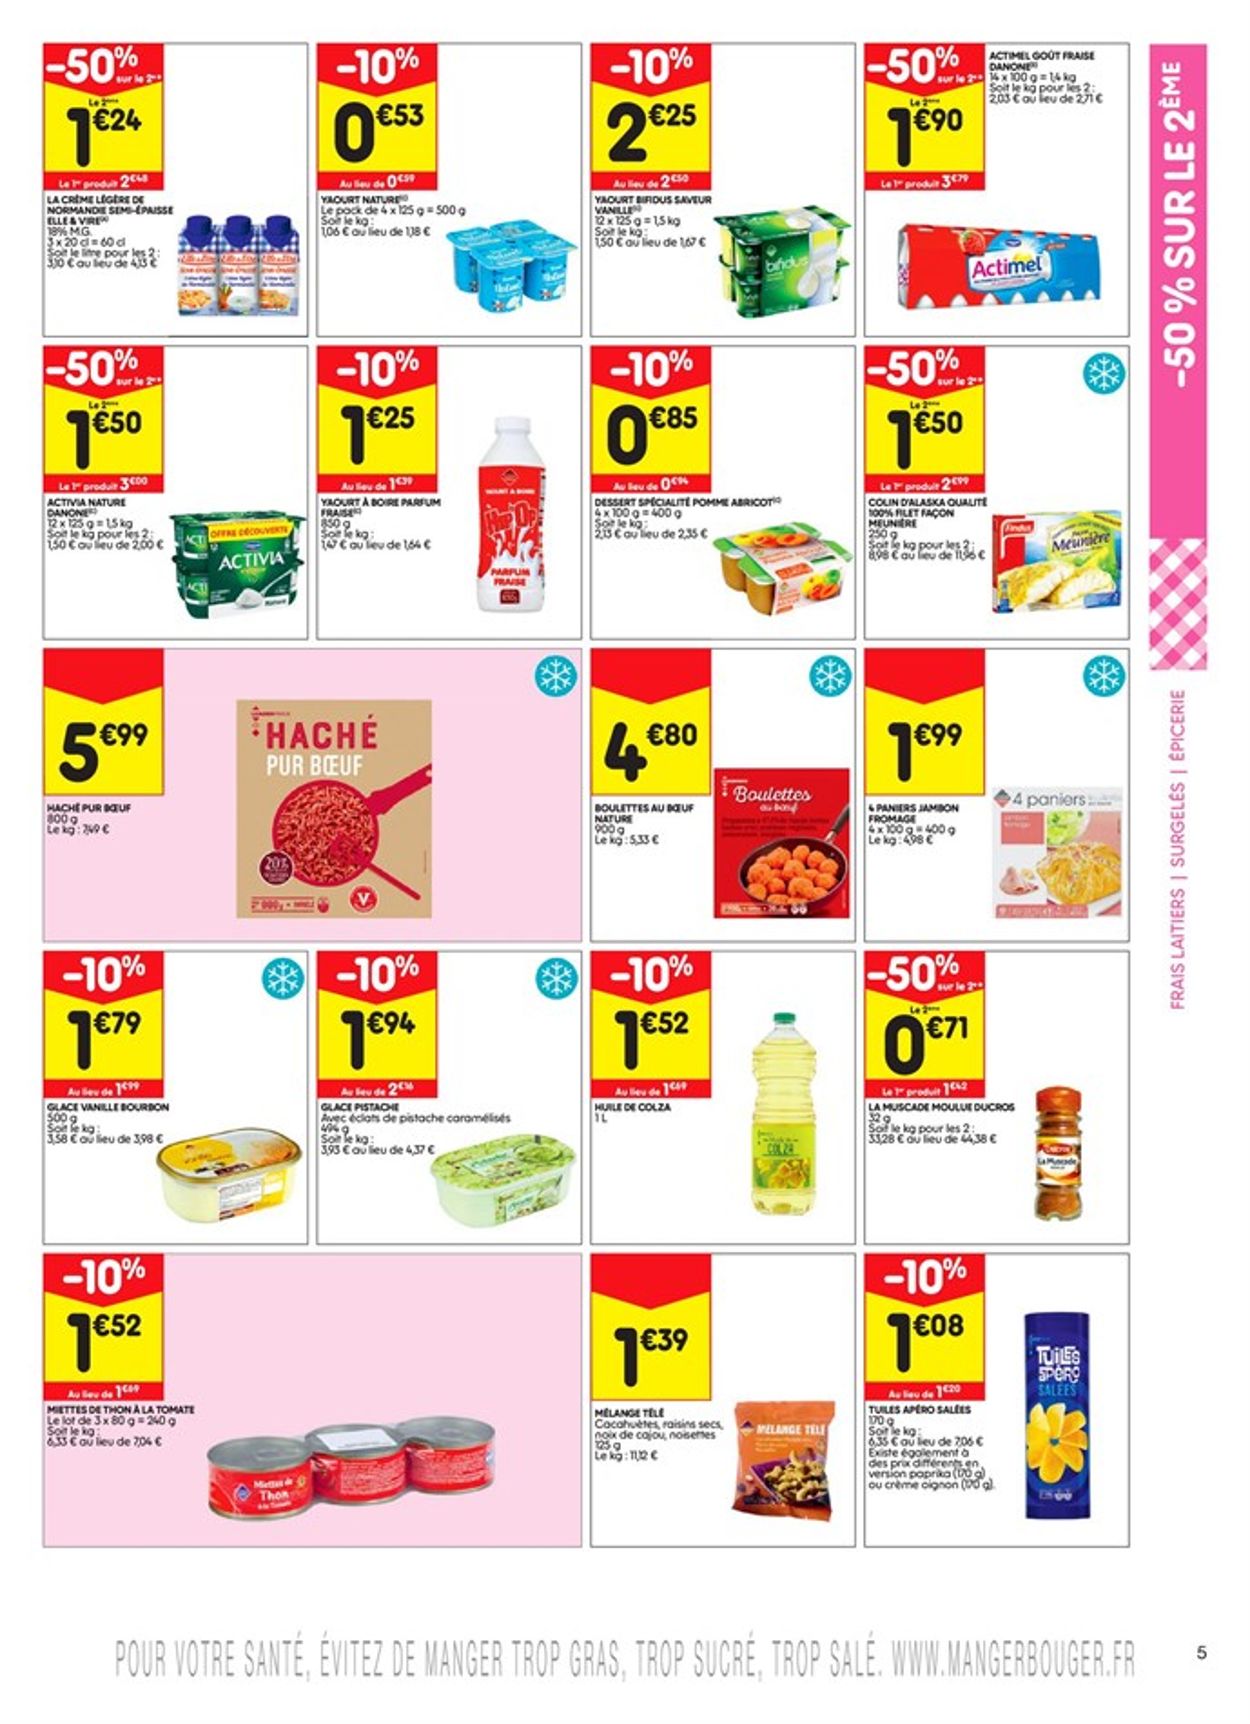 Leader Price Catalogue - 23.02-07.03.2021 (Page 5)